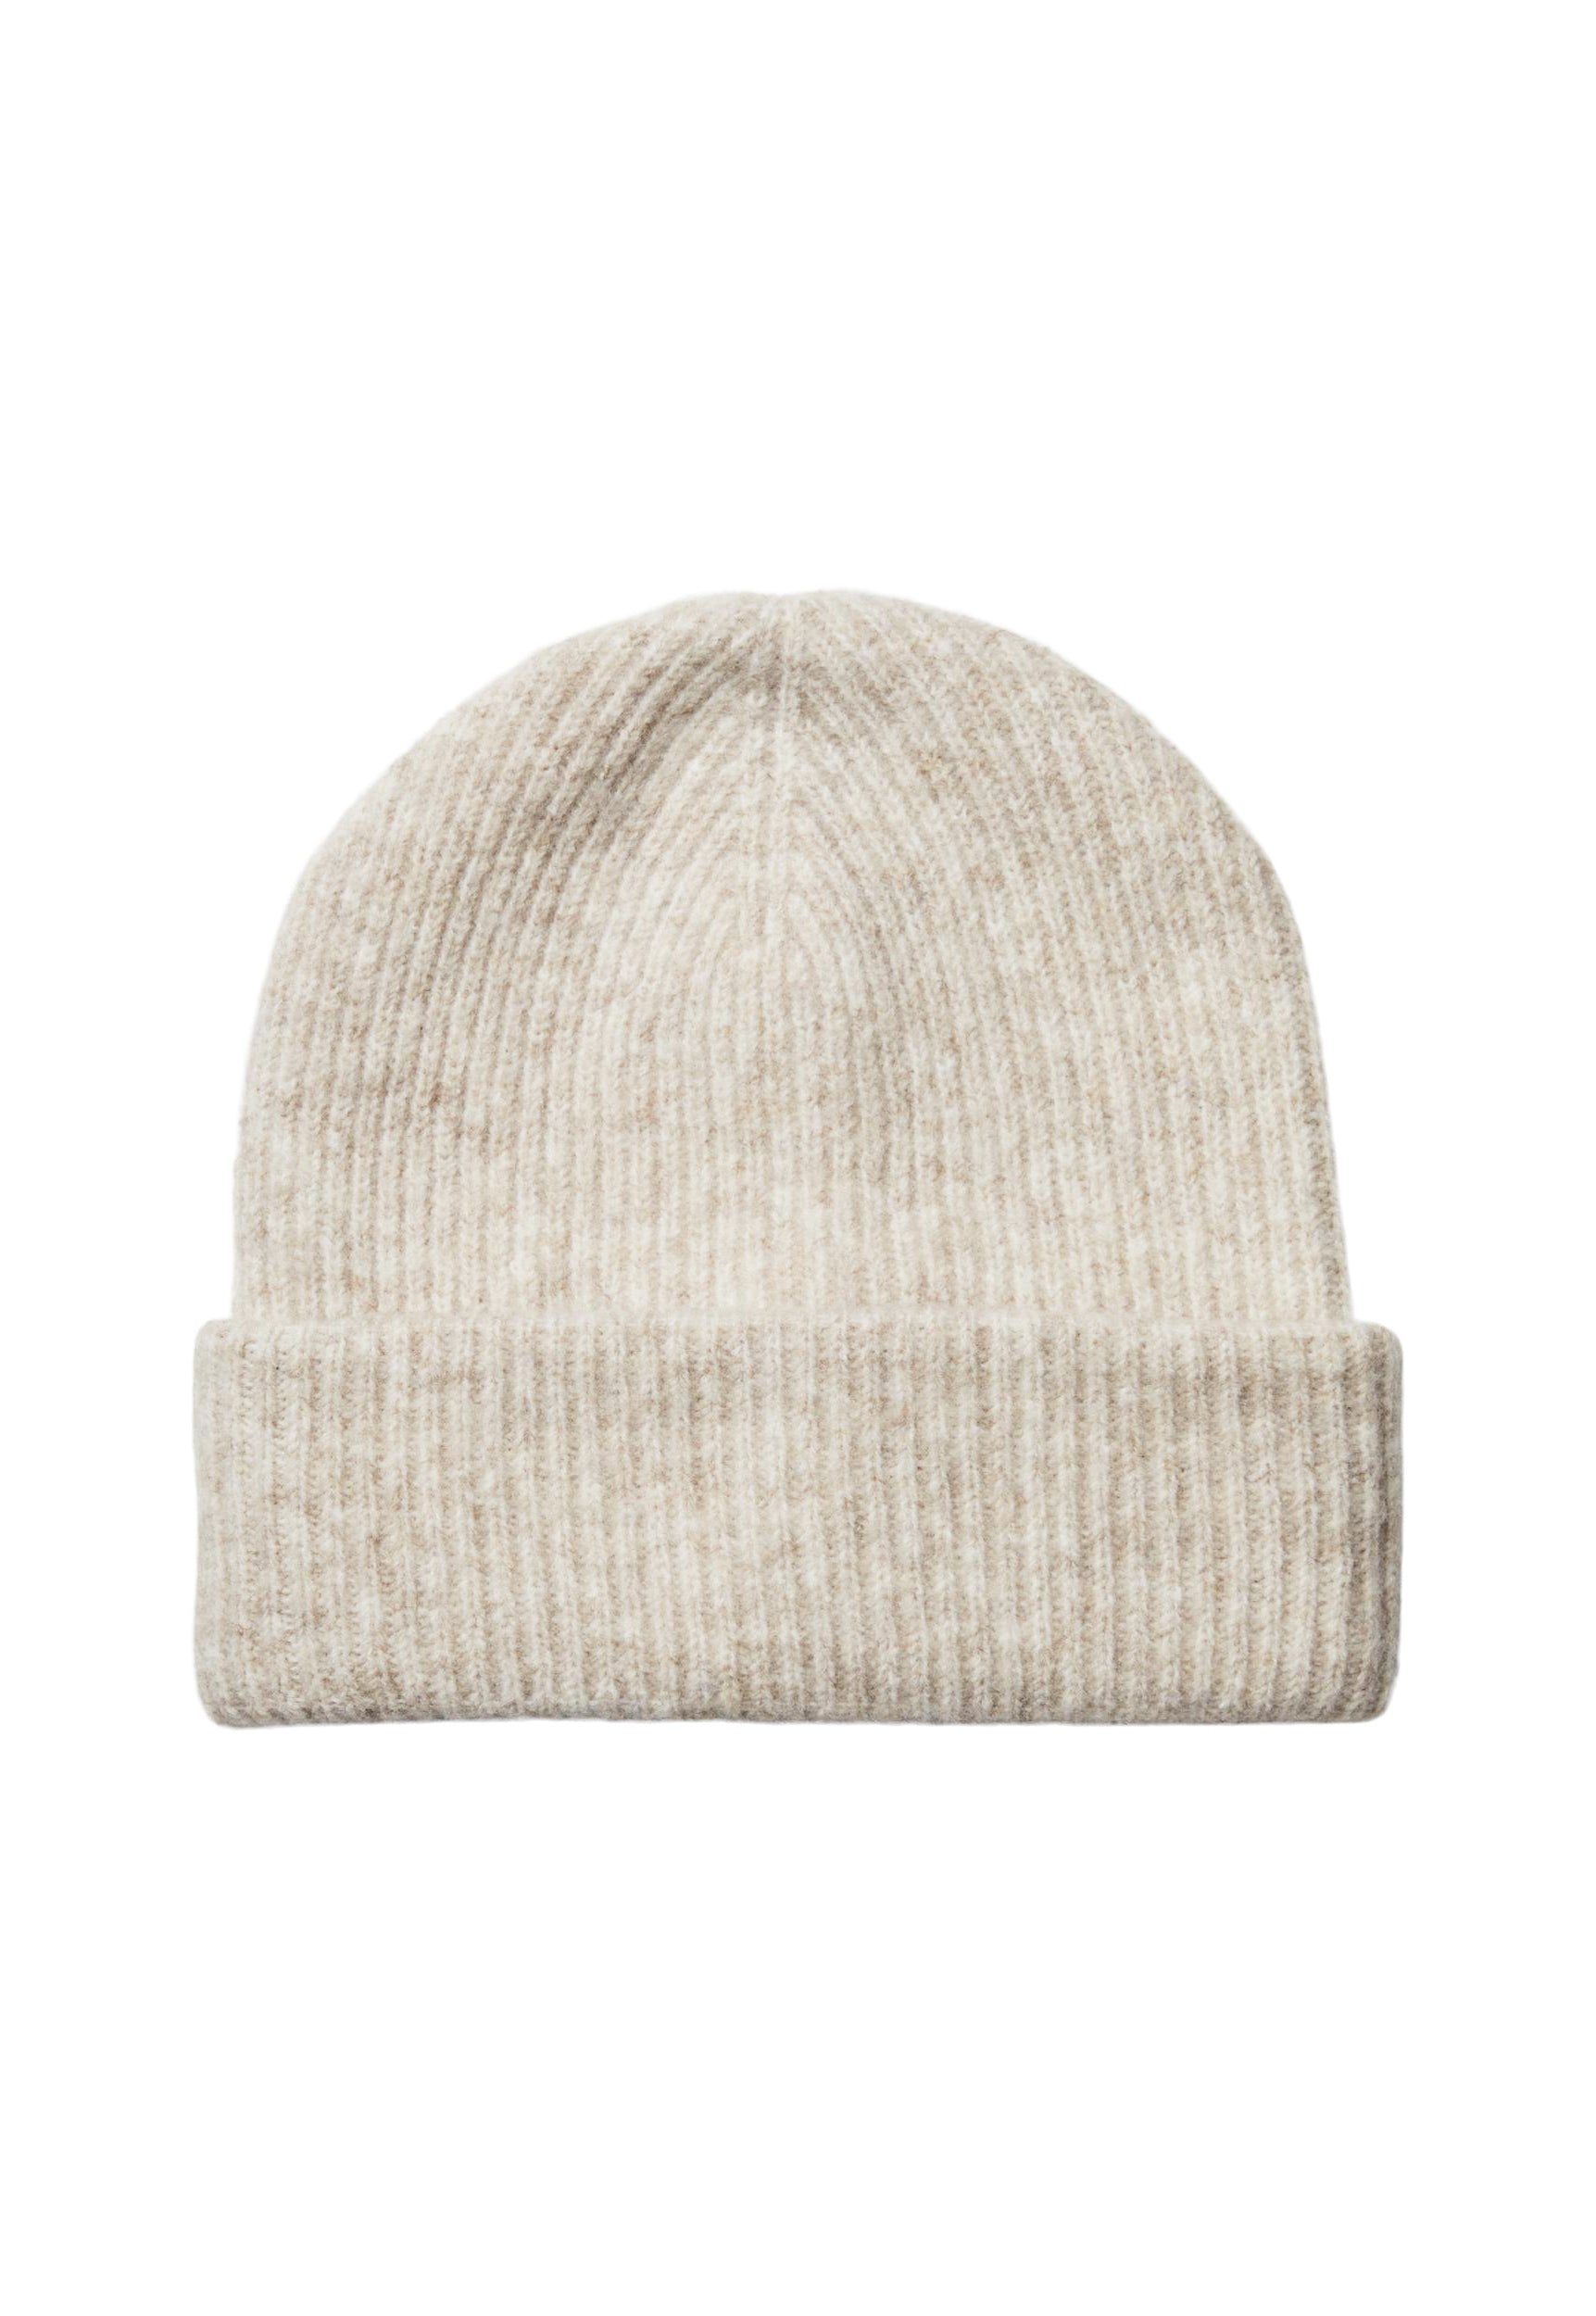 PIECES Cashmere Fluffy Knit Ribbed Turn Up Beanie Hat in Cream Melange ...